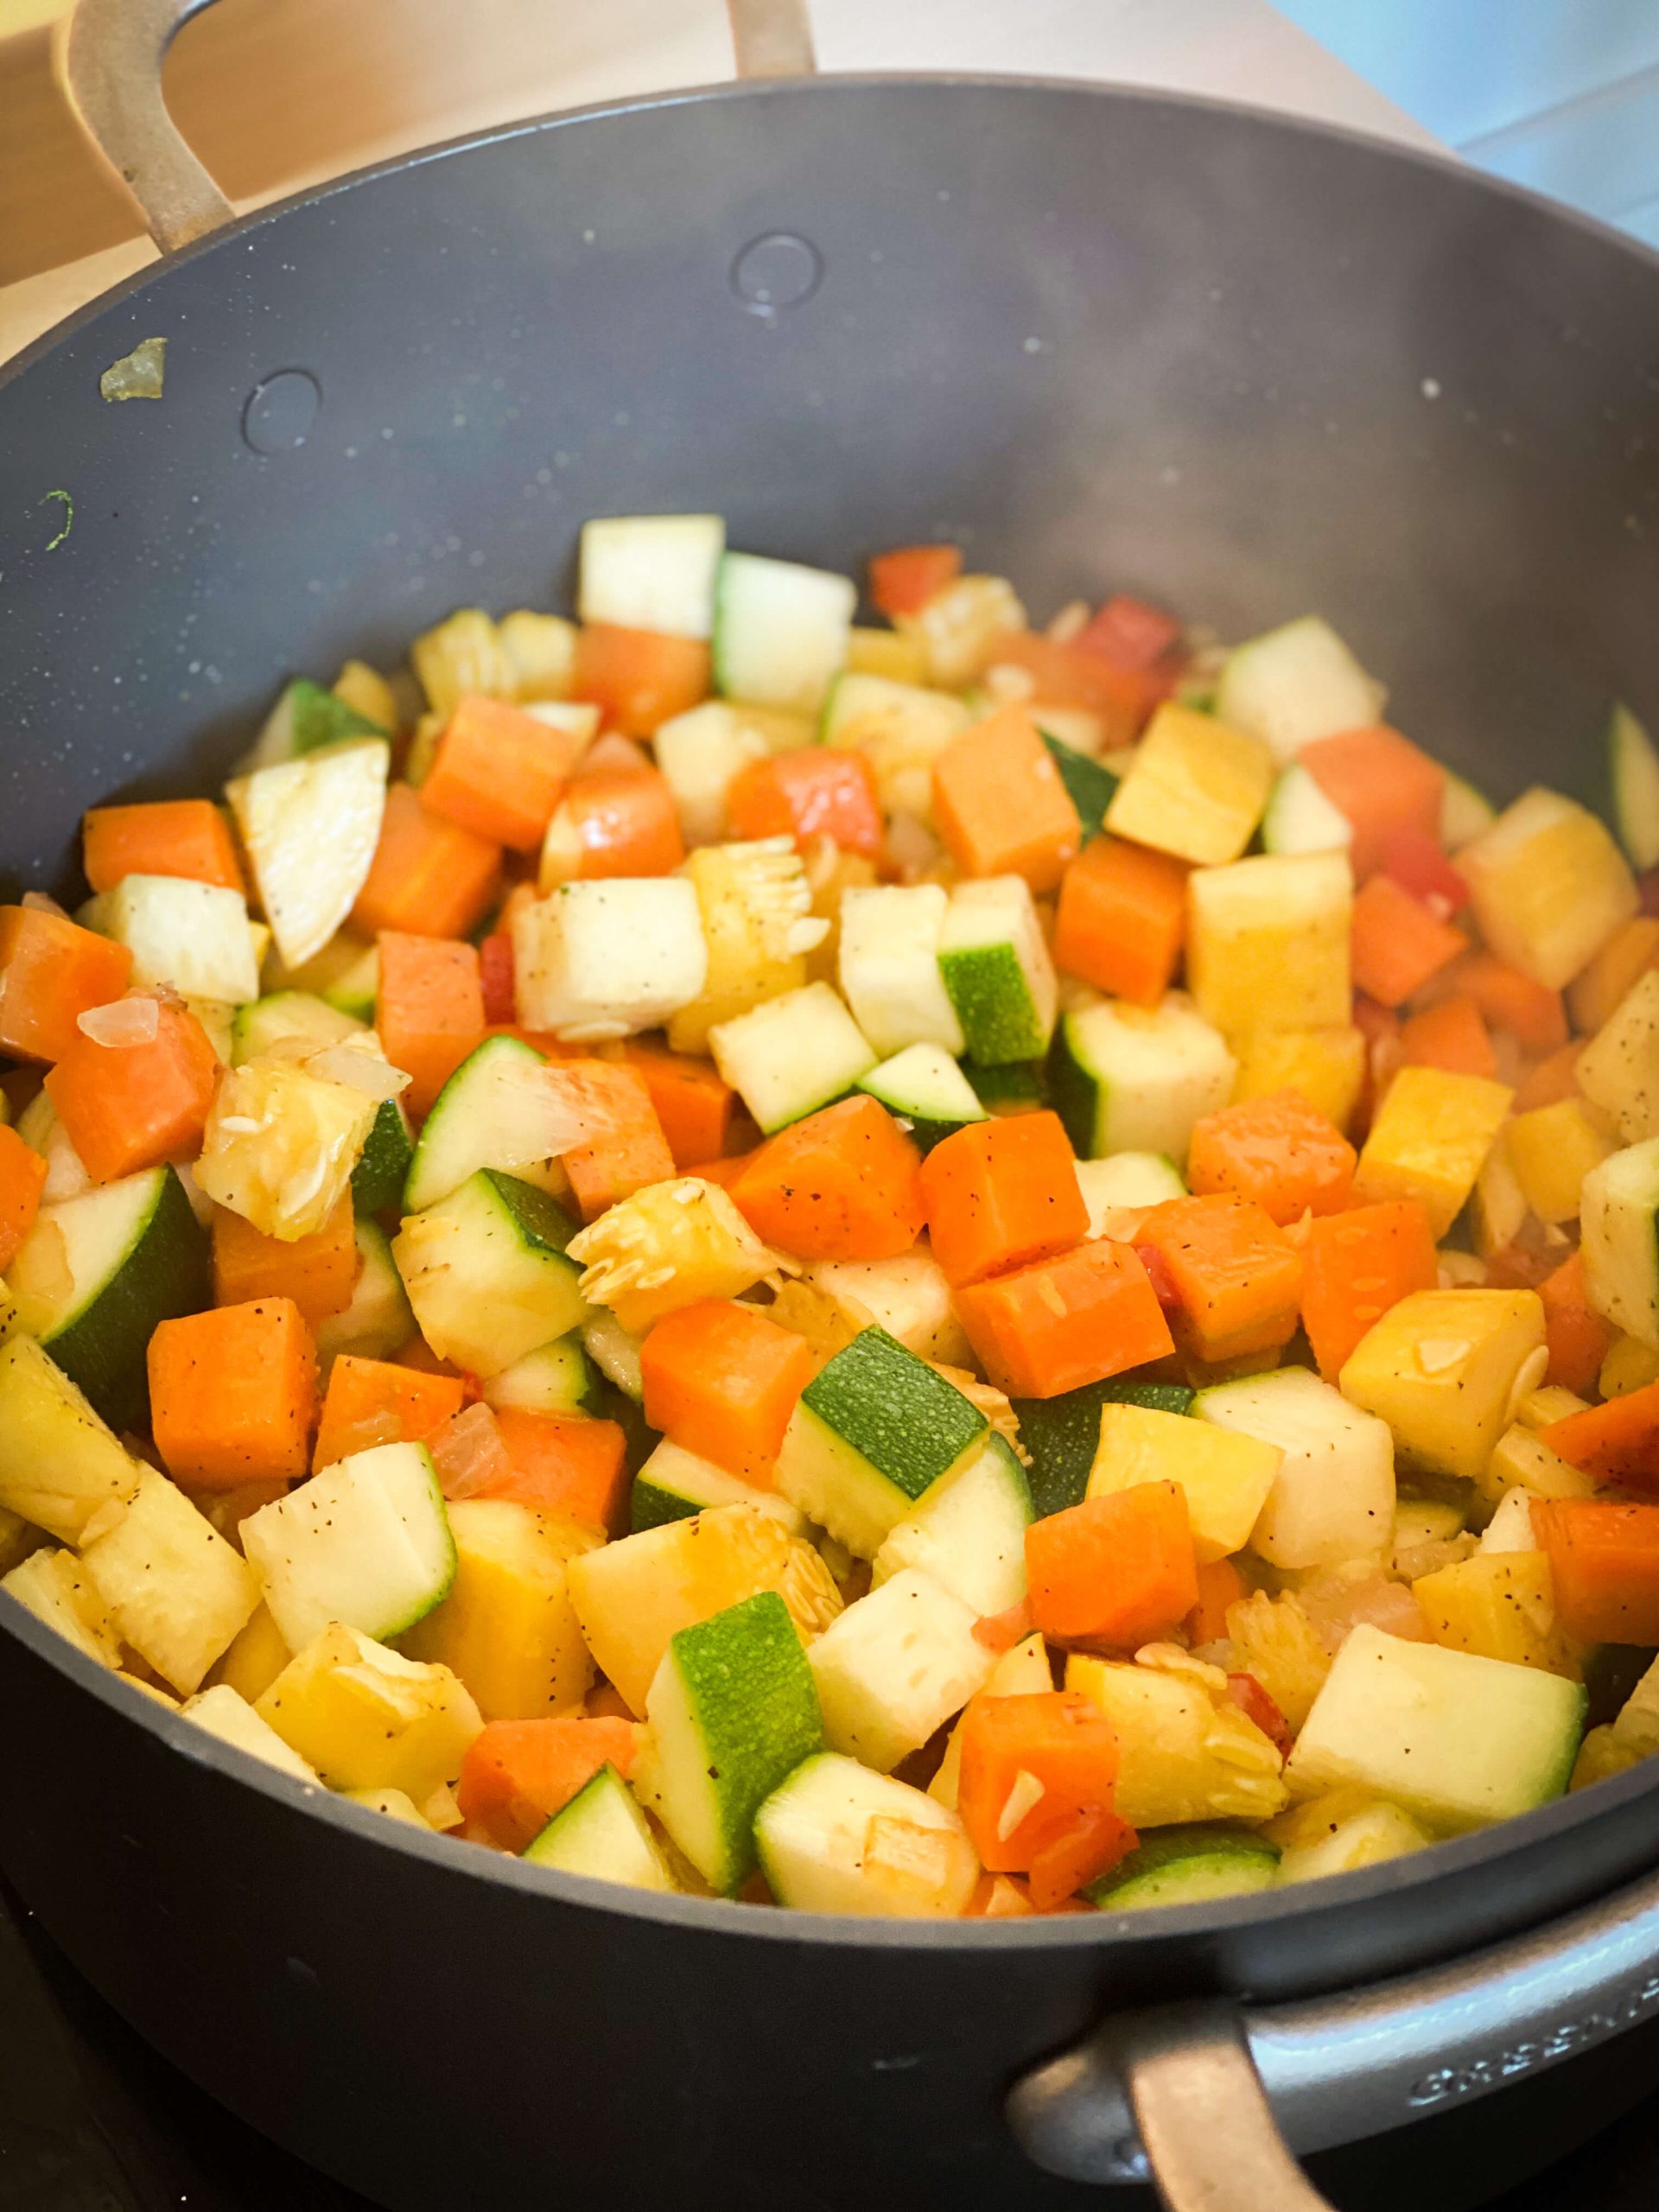 Onions and peppers sautéing in olive oil